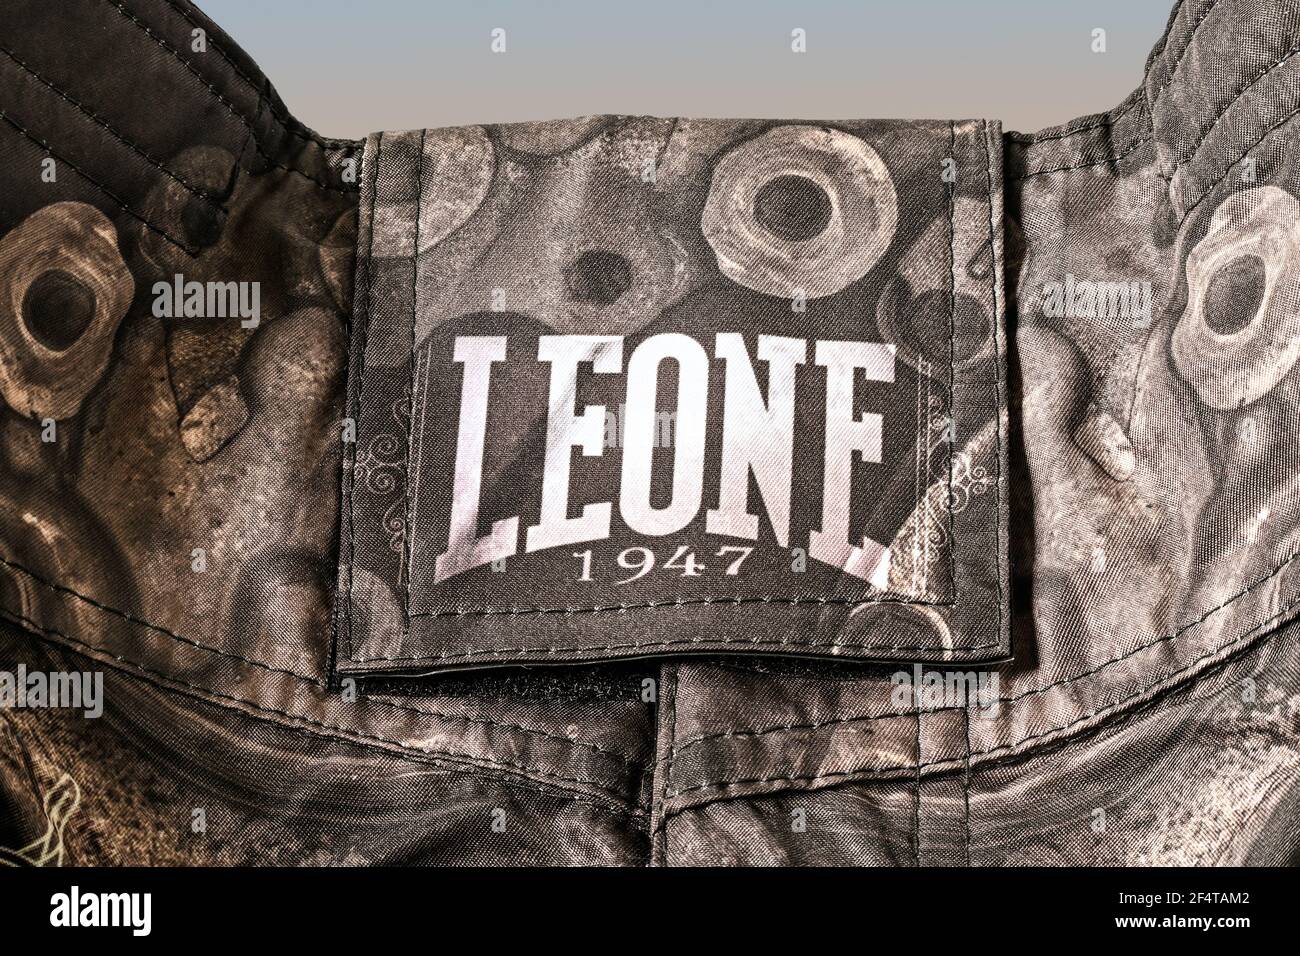 BRAUNSCHWEIG, GERMANY - MARCH 22, 2021: LEONE 1947 Italy Mixed Martial Arts (MMA) Shorts in closeup. Italian sportswear, specialized in combat sports. Stock Photo